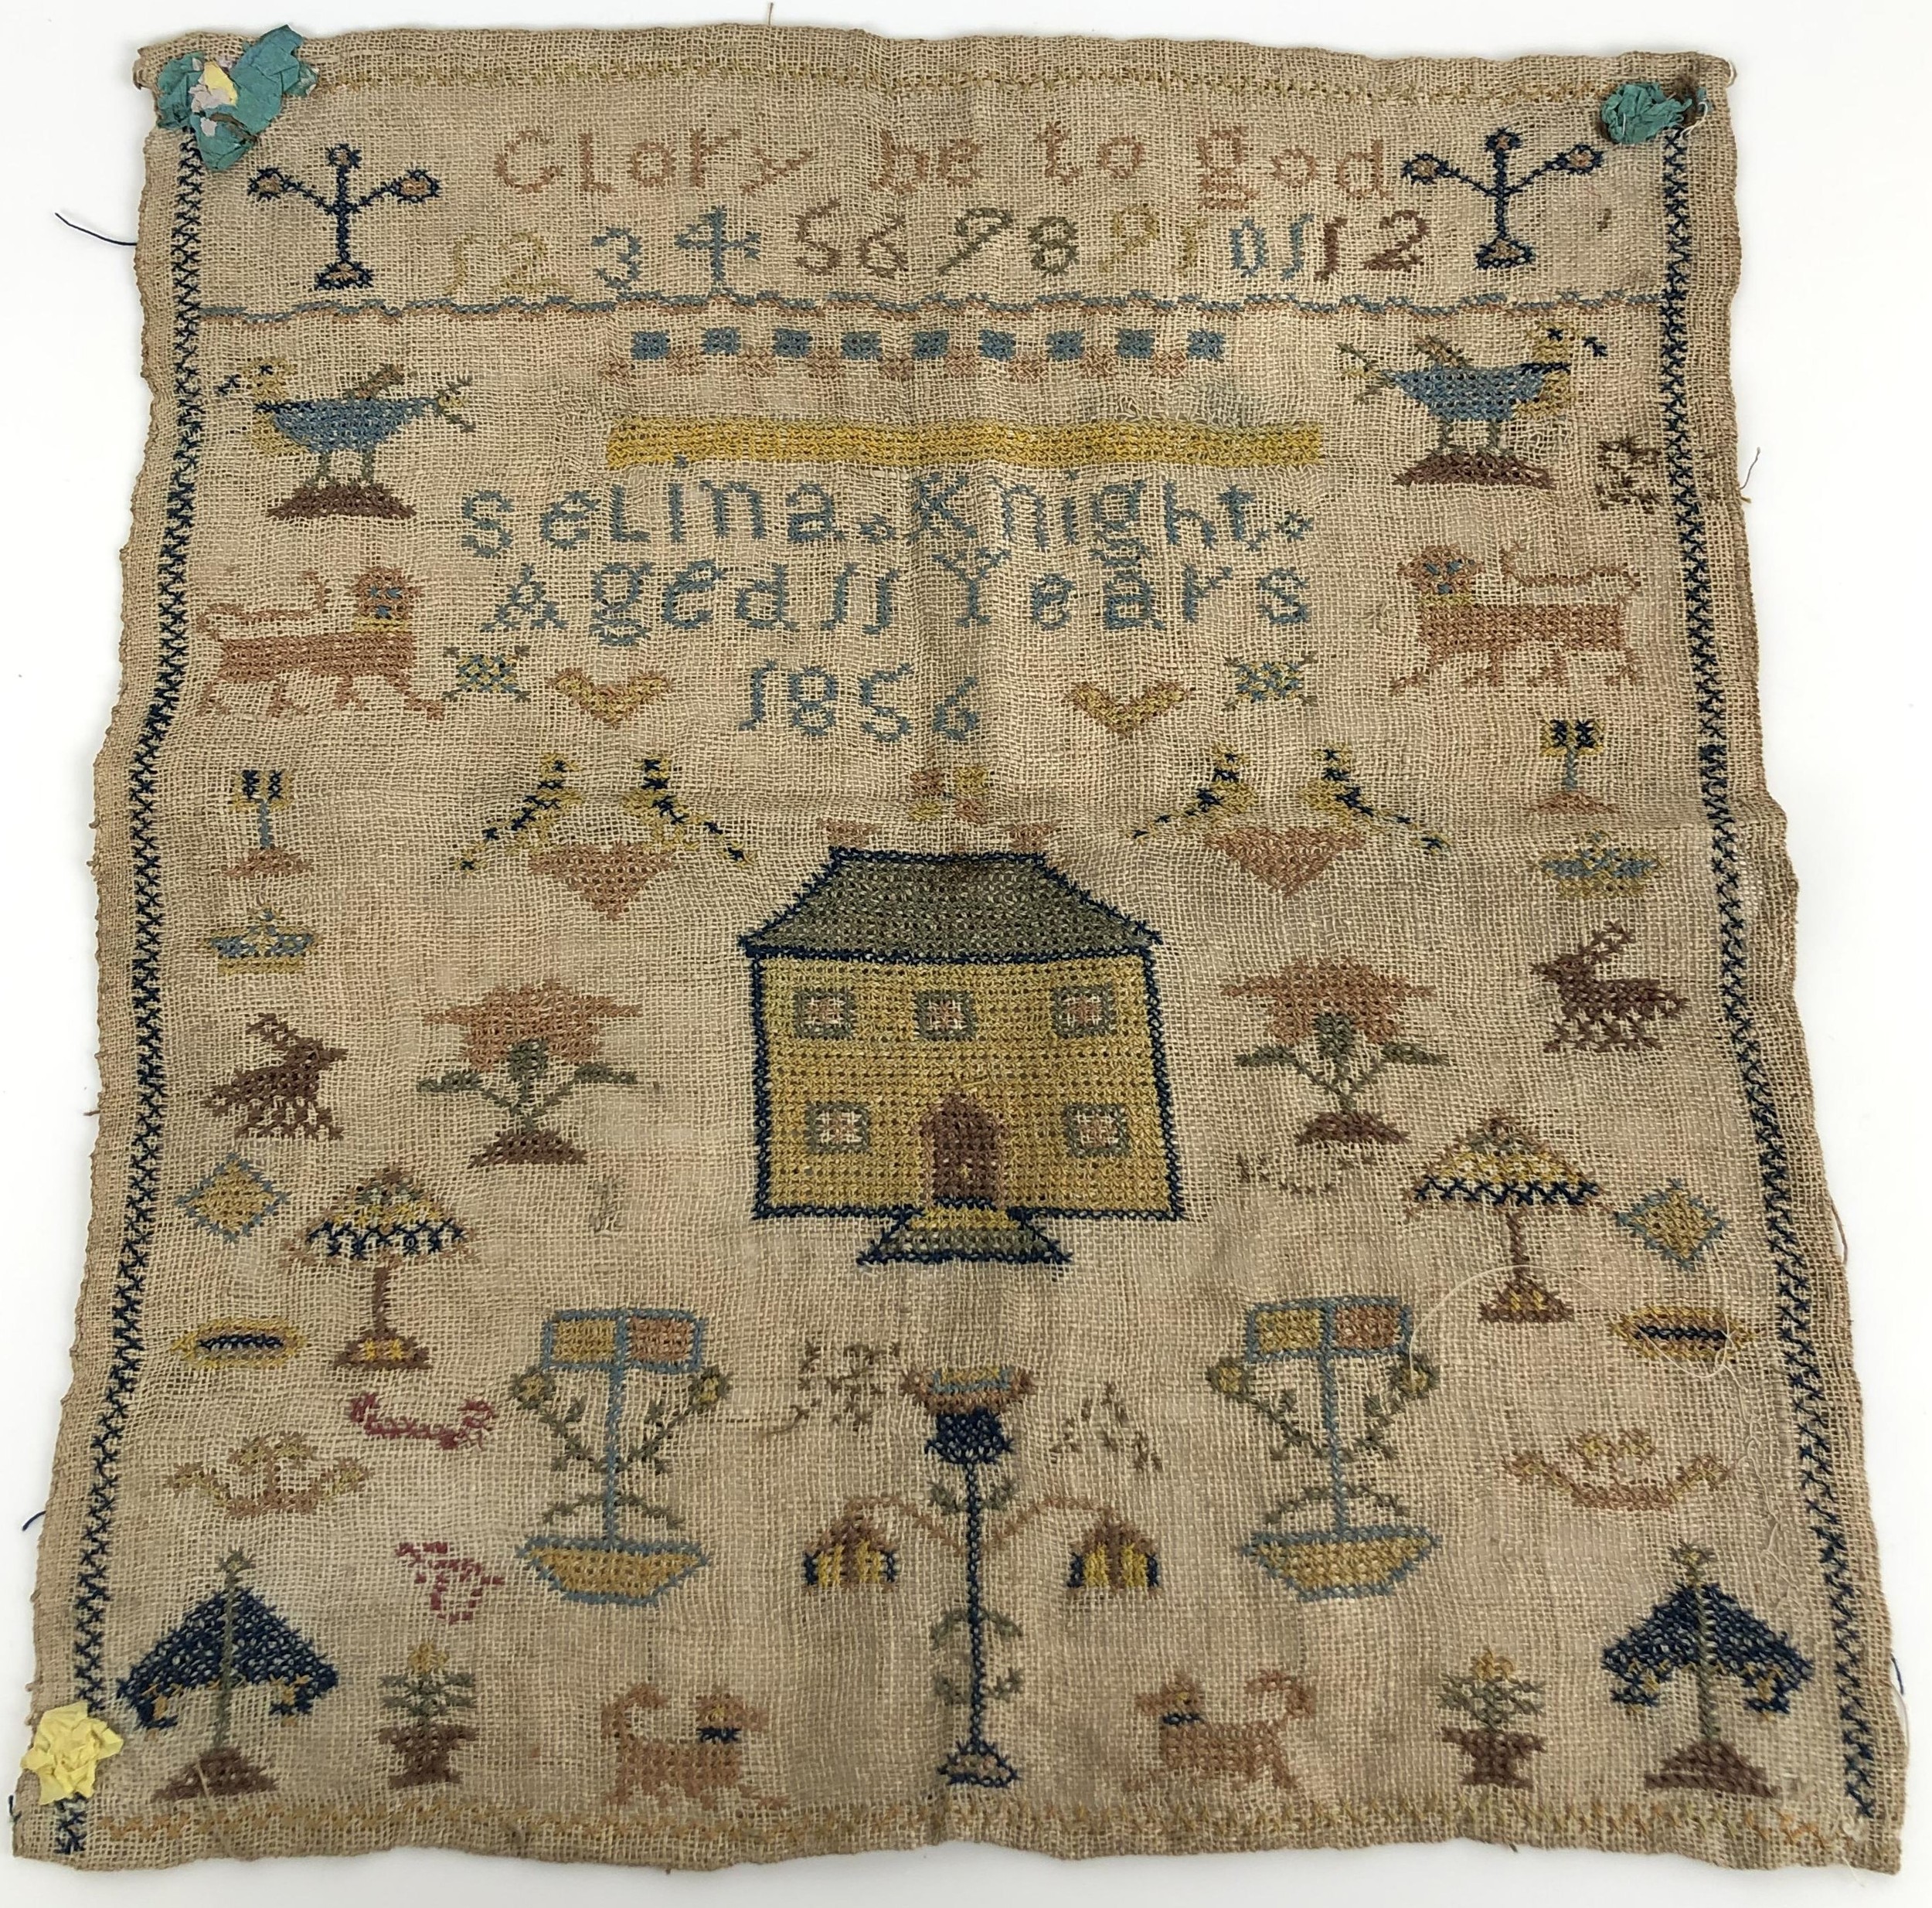 A 19th century sampler, signed Selina Knight, aged 11, dated 1856, 35 x 33 cm